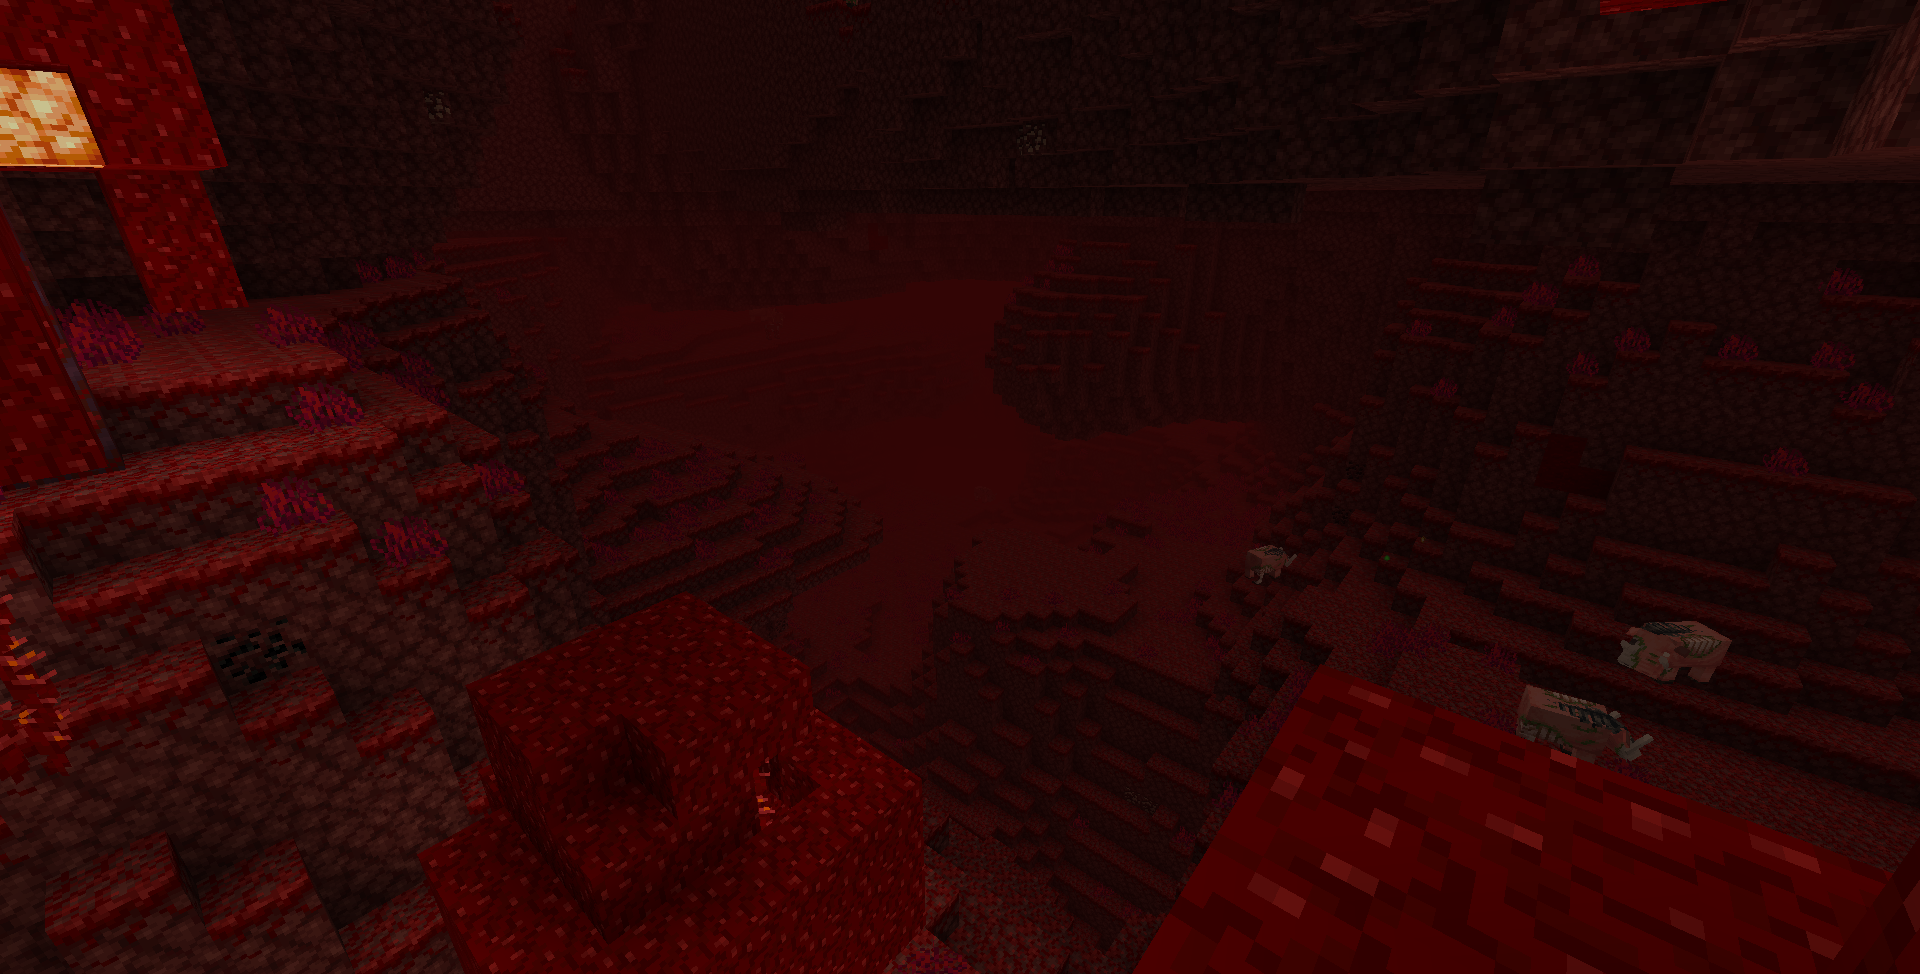 An image of a vast crimson valley biome, taken from the top of a giant crimson fungus in a neighboring crimson forest. The edge of the forest can be seen at the bottom and the left sides of the image. Three zoglins can be seen on the right of the image. Between them lie some experience orbs, indicating a mob has died there, presumably fighting the zoglins.